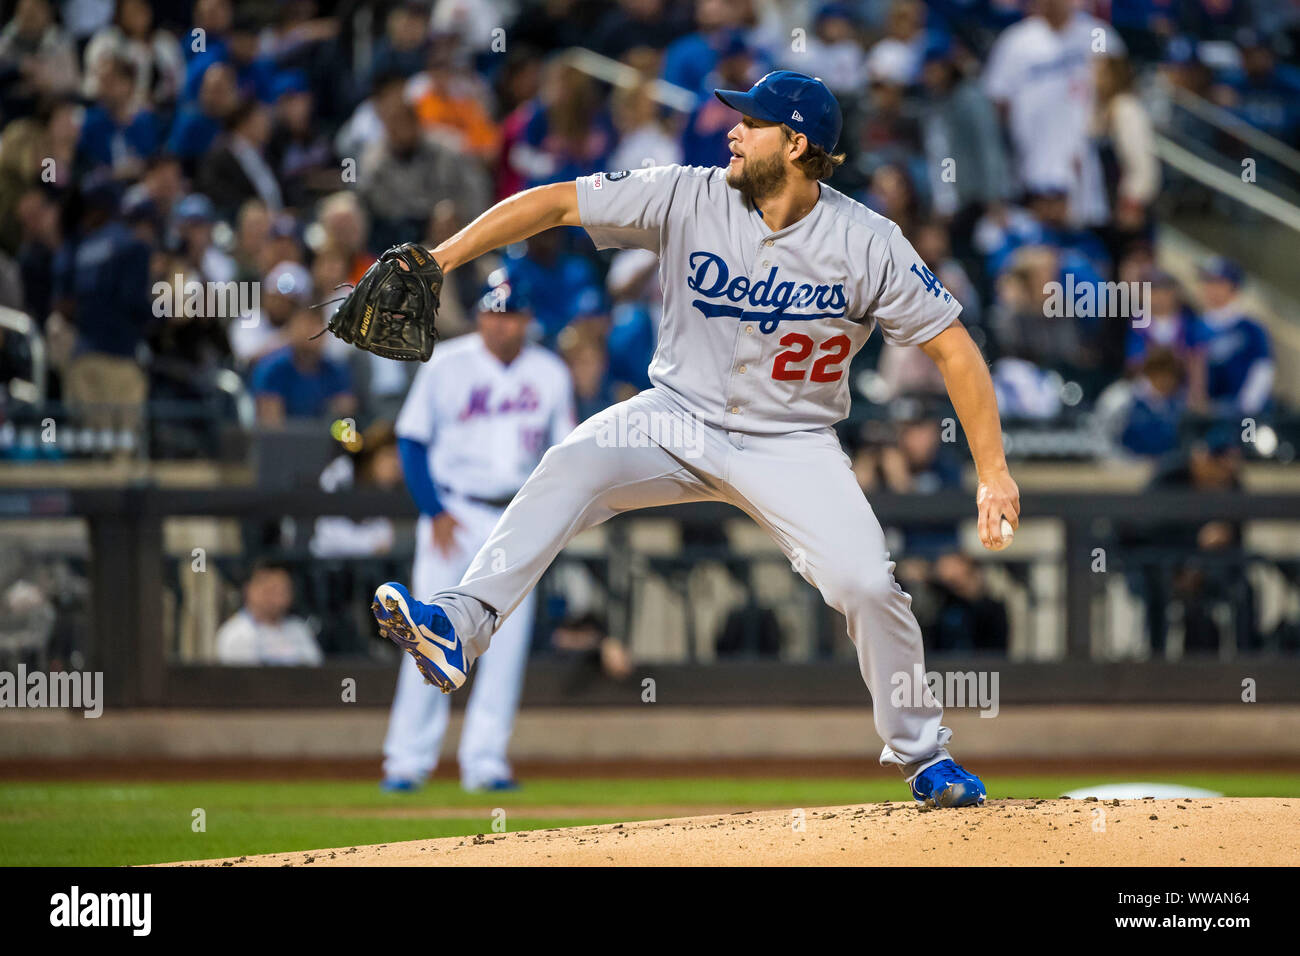 Queens, New York, USA. 13th Sep, 2019. Los Angeles Dodgers starting pitcher Clayton Kershaw (22) delivers the pitch during the game between The New York Mets and The Los Angeles Dodgers at Citi Field in Queens, New York. Mandatory credit: Kostas Lymperopoulos/CSM/Alamy Live News Stock Photo